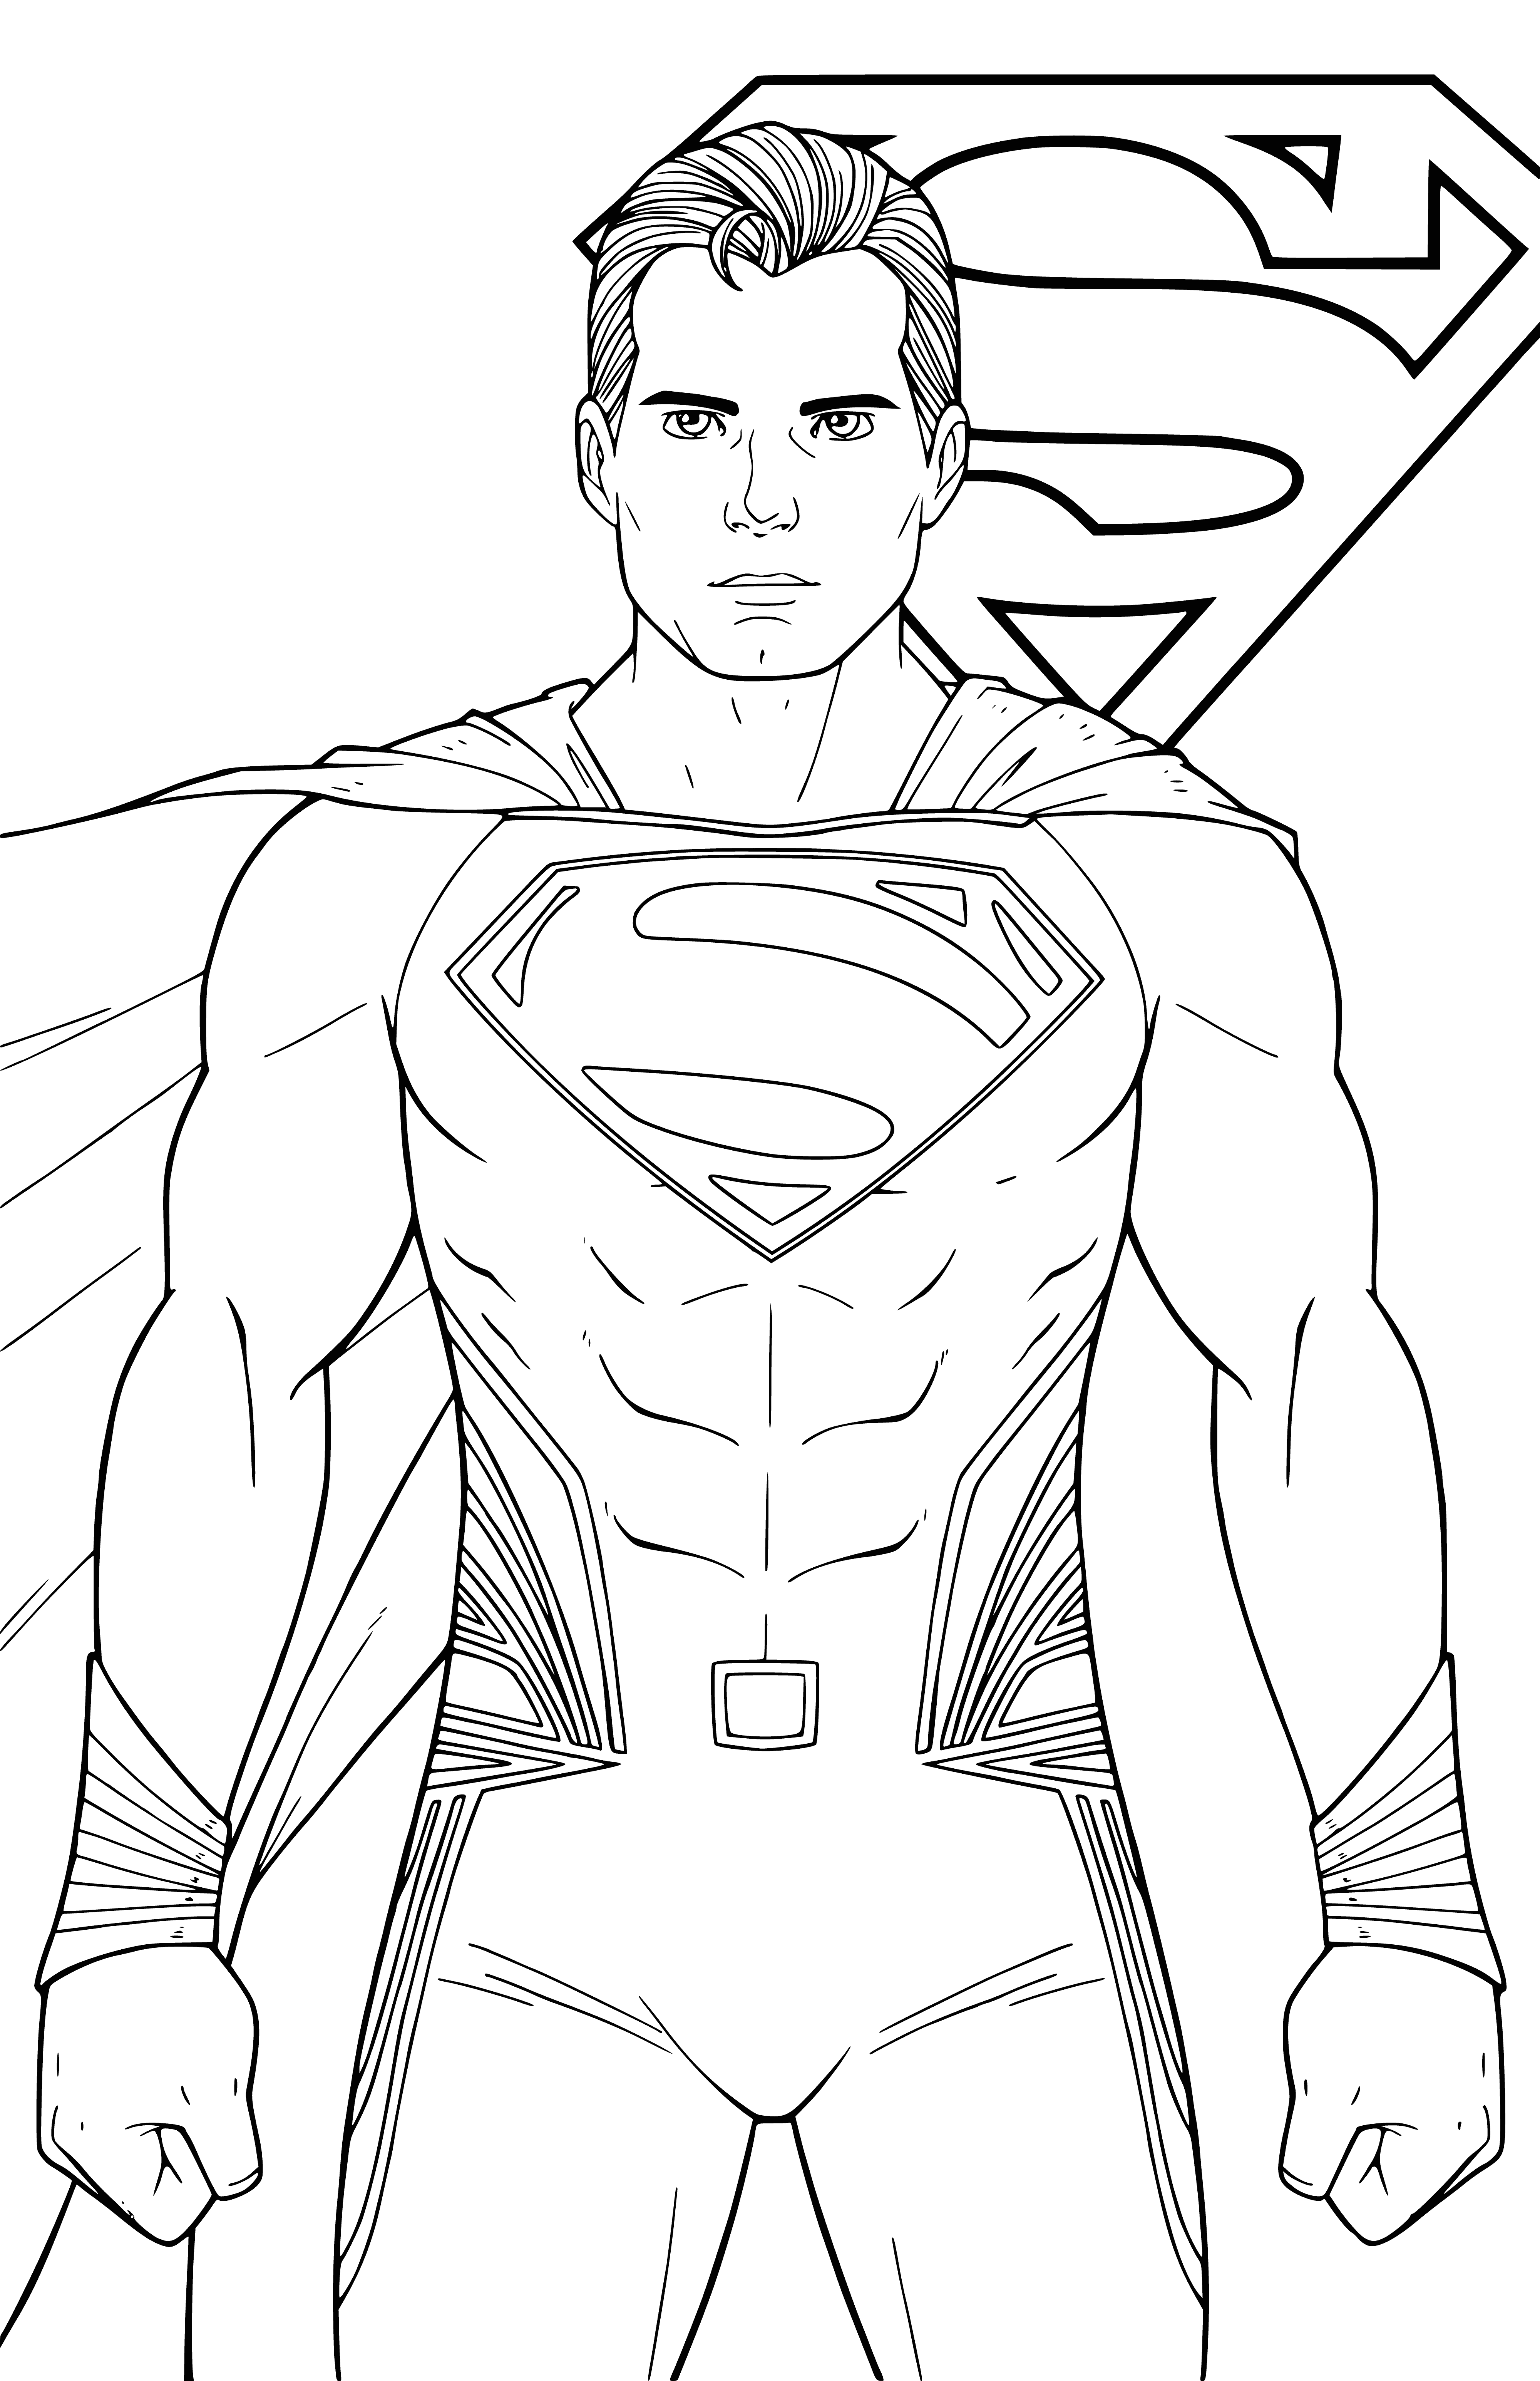 coloring page: Superman stands strong and powerful in the middle of a busy city street, ready to save the day as the world's greatest superhero.